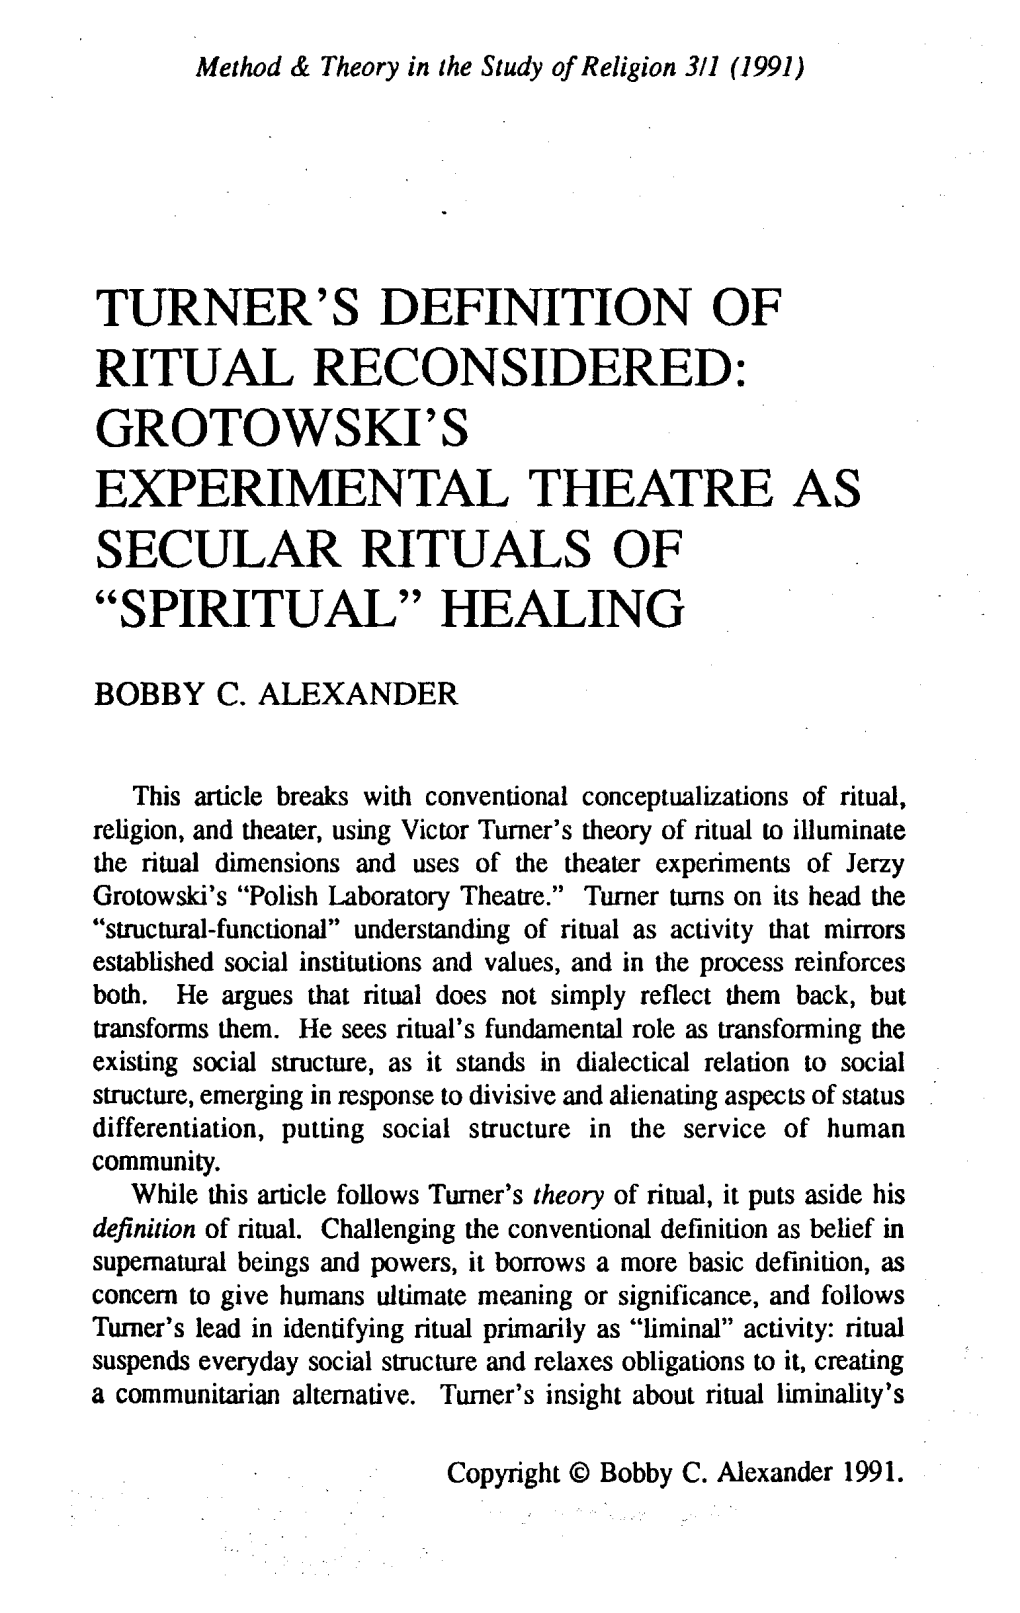 Turner's Definition of Ritual Reconsidered